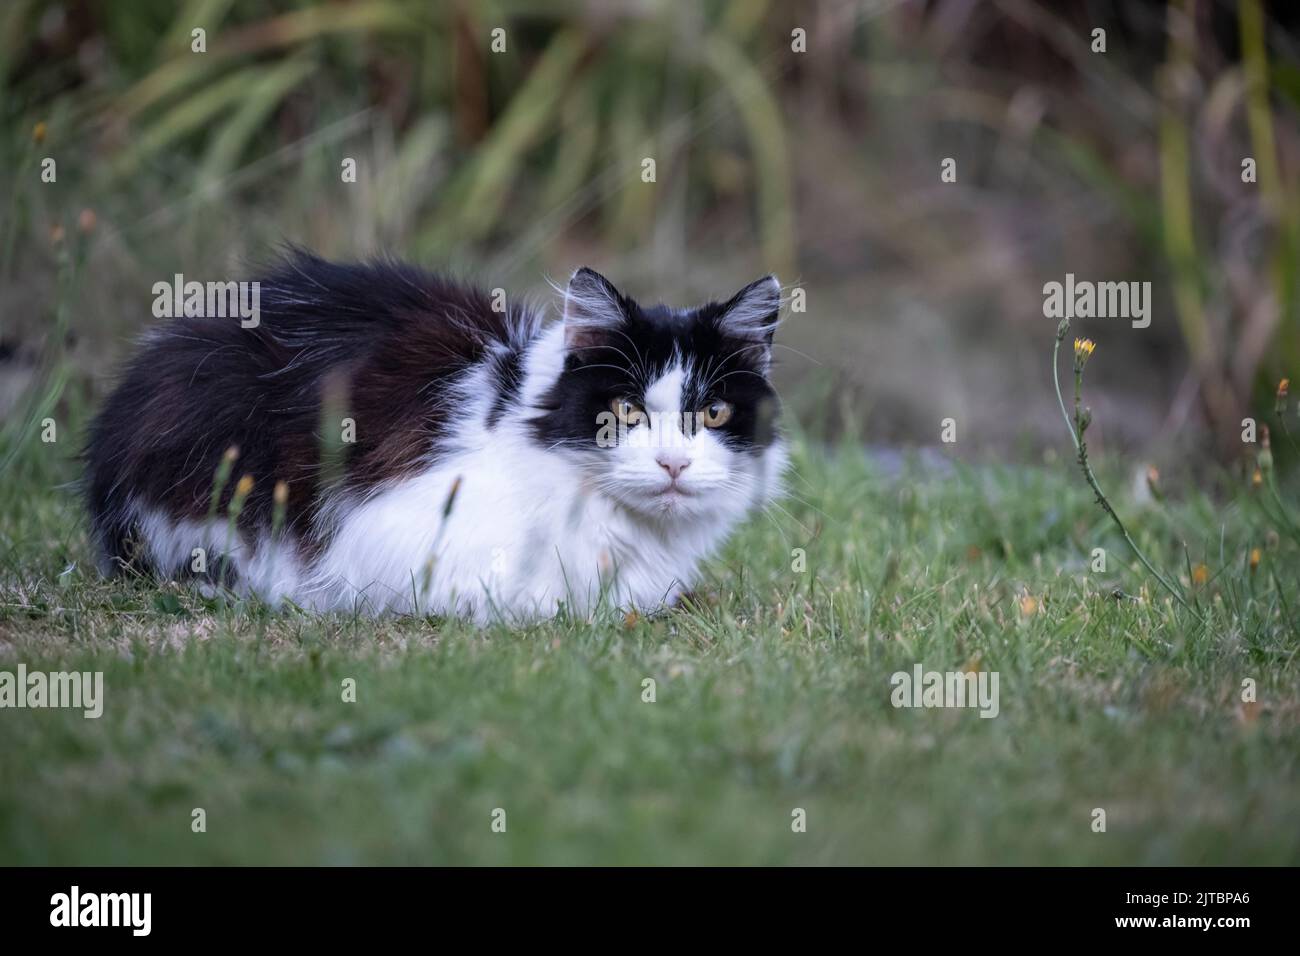 Close up of a Black and White domestic cat (Felis catus) lying on the grass in a residential garden Stock Photo